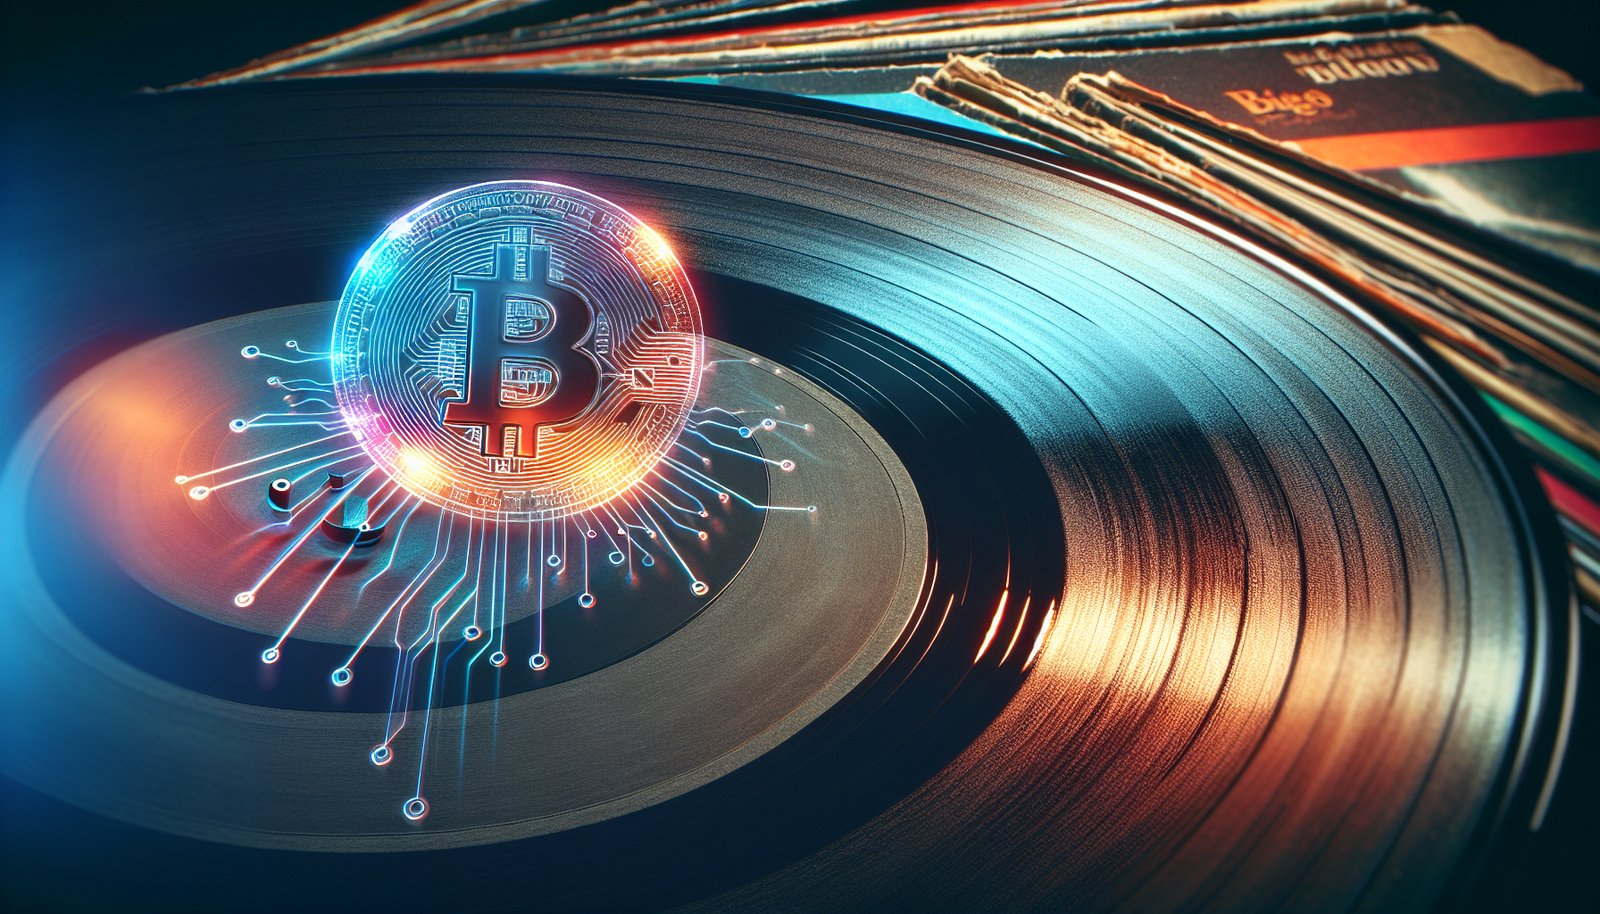 Mixed views on blockchain use in the music industry